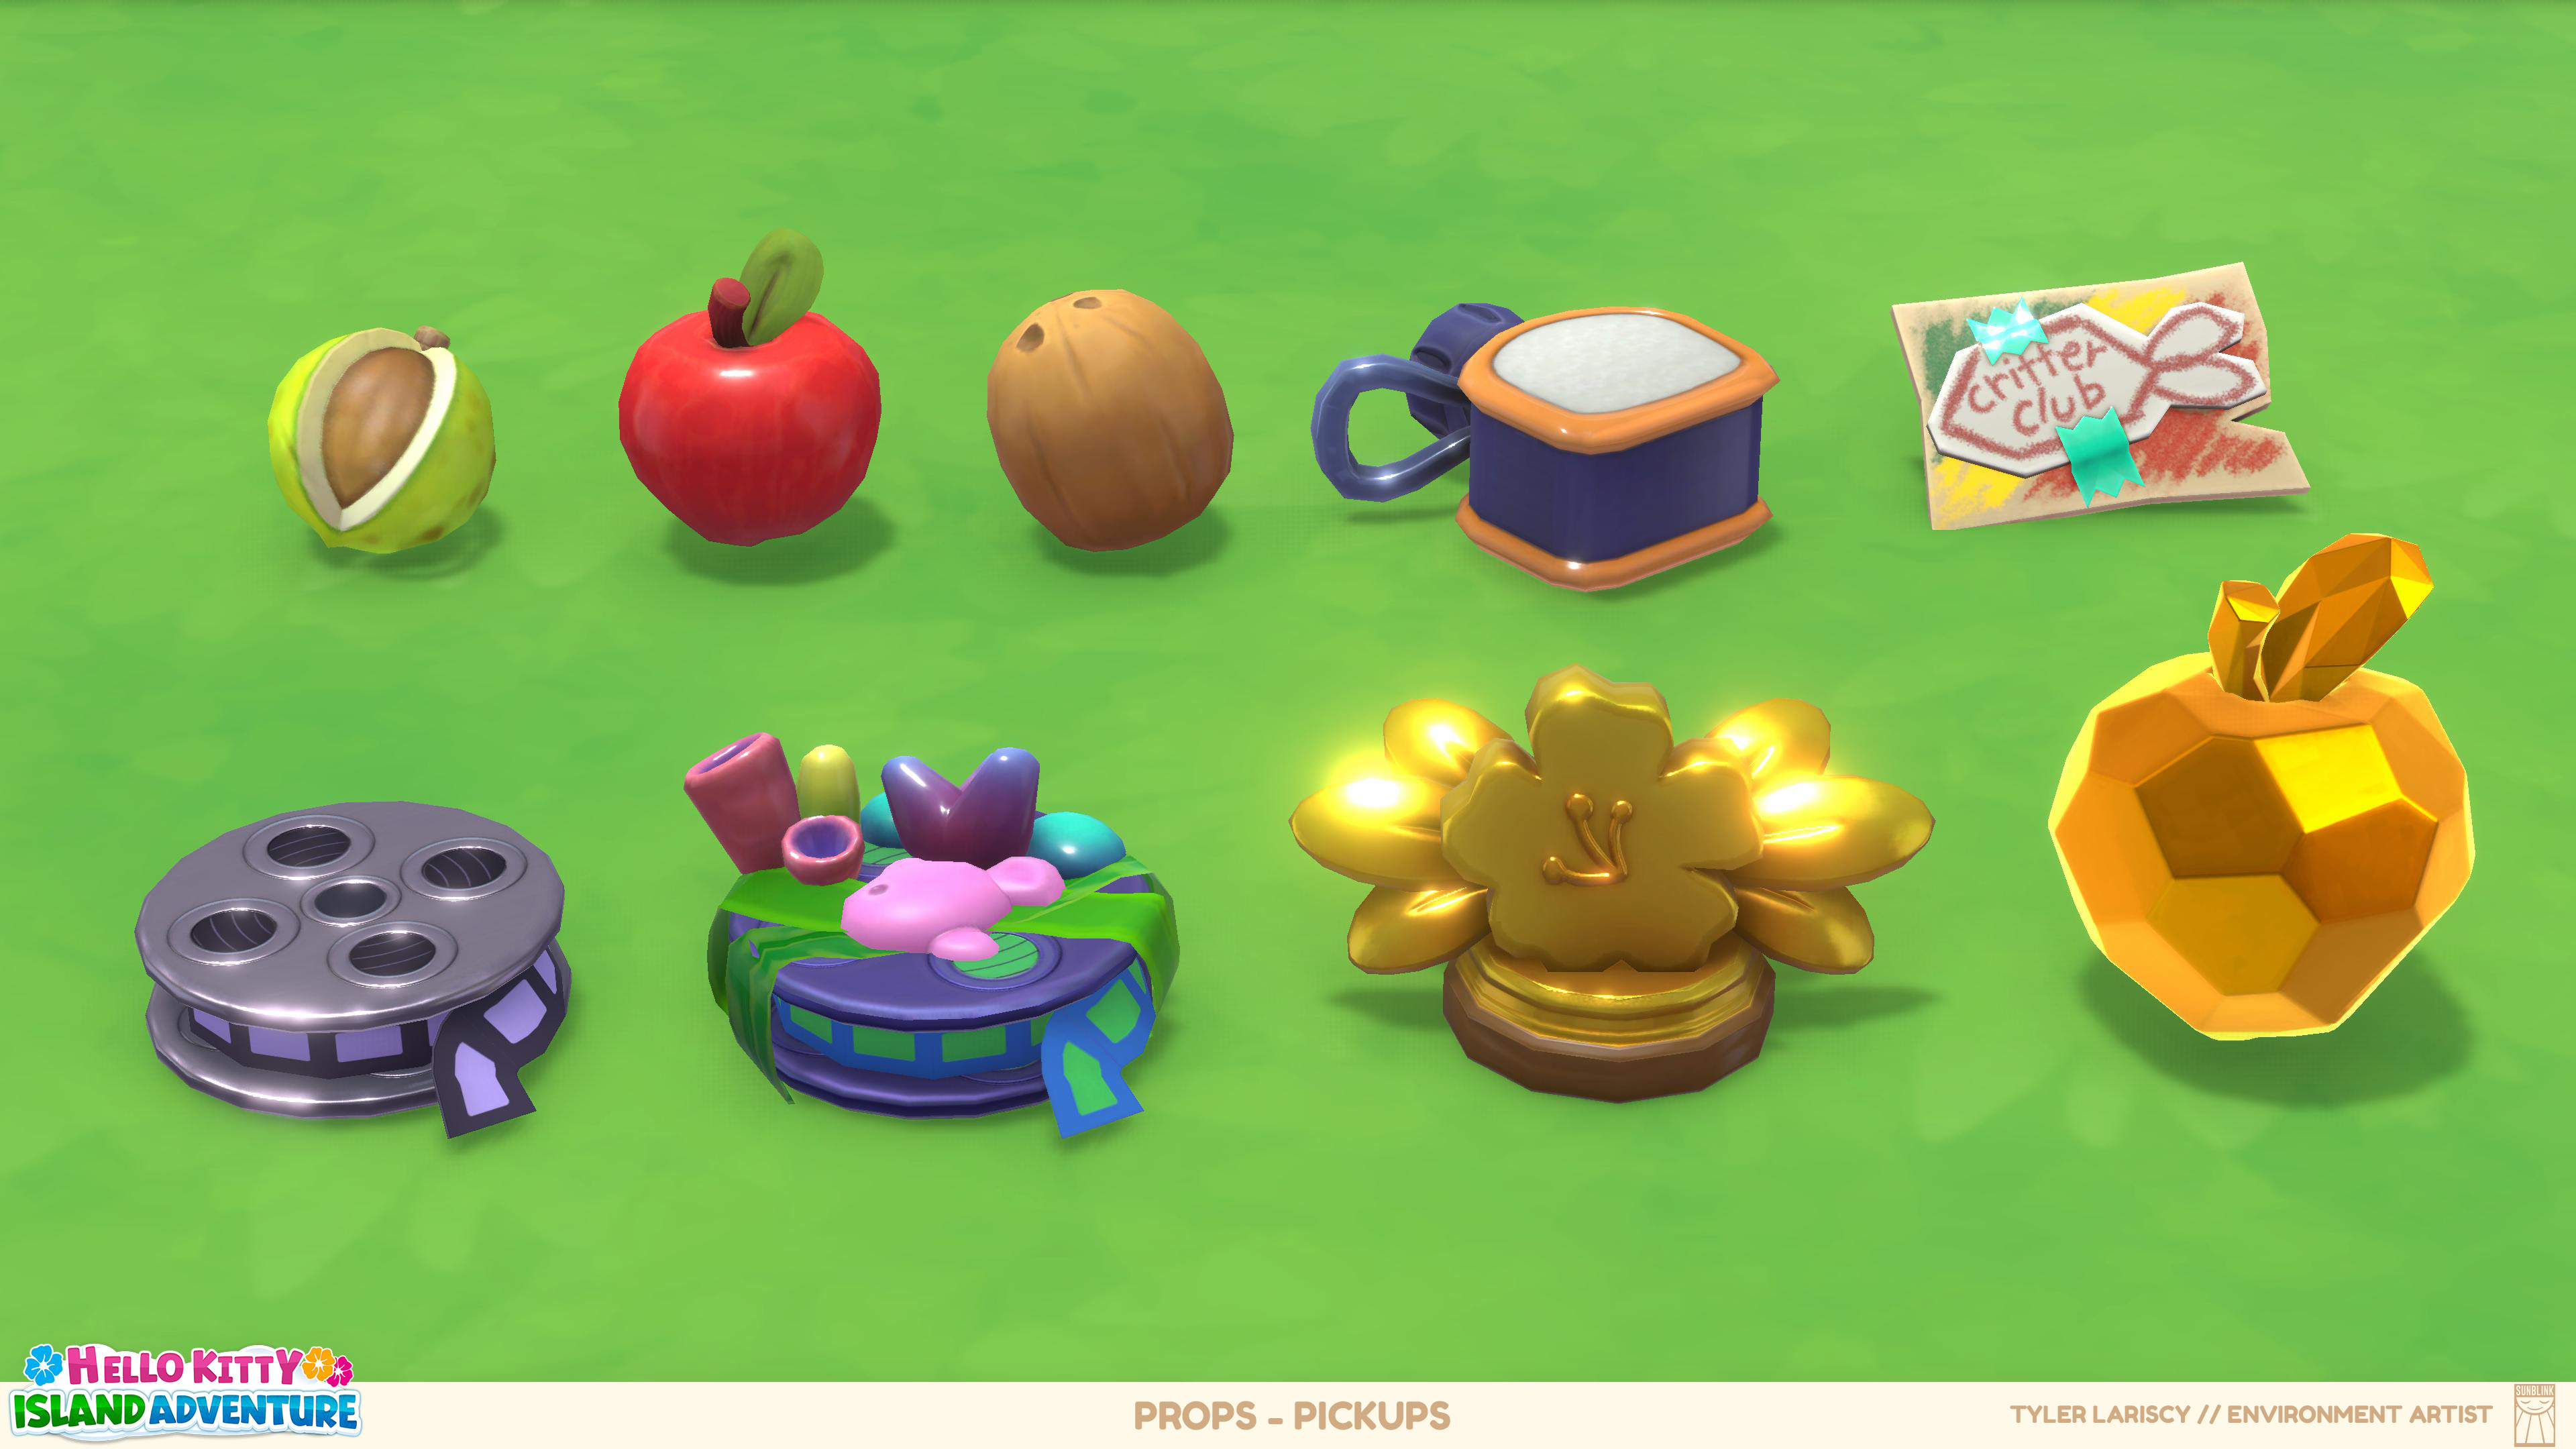 Items found in various places in the game to be picked up by the player. Ranging from food items, to mission items and to stamina pickups.